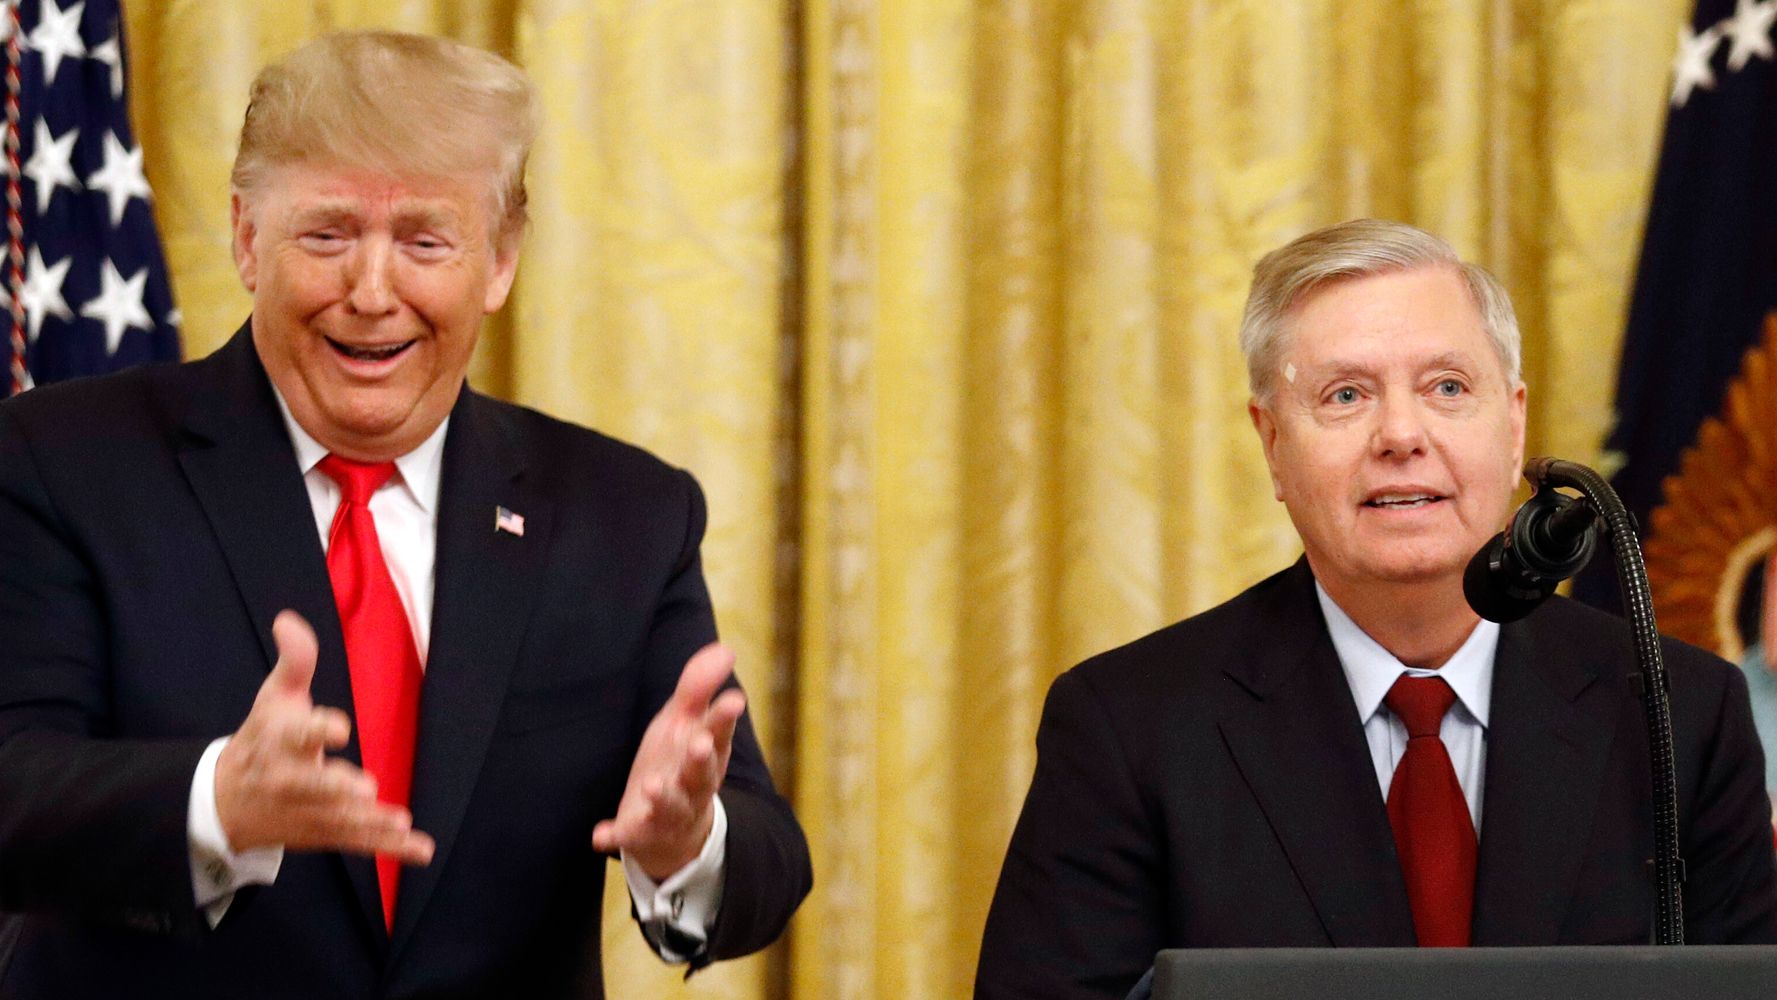 'Dancing Monkey' Lindsey Graham Performs For Trump In 'Extraordinary' New Audio